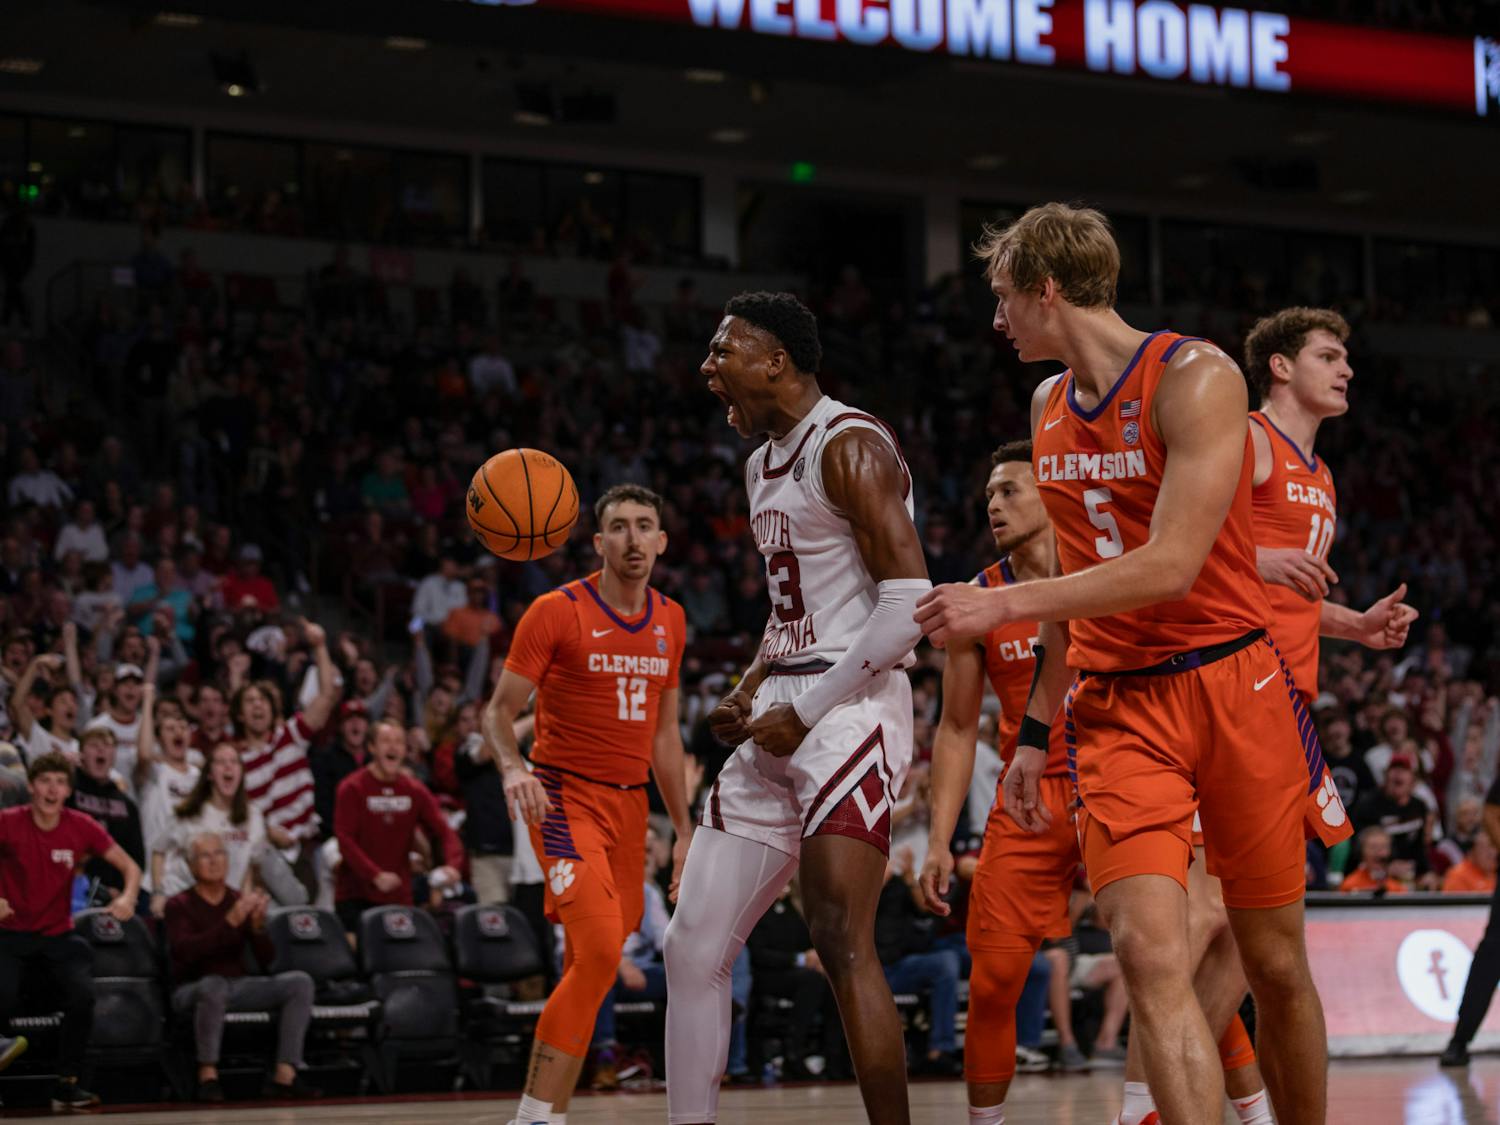 South Carolina had an intense matchup with in-state rival Clemson on Friday Nov. 11, 2022. Senior guard Chico Carter secured the win for the Gamecocks with a buzzer beating shot to end the game. With the 60-58 win, South Carolina is now 2-0 in head coach Lamont Paris' first season.